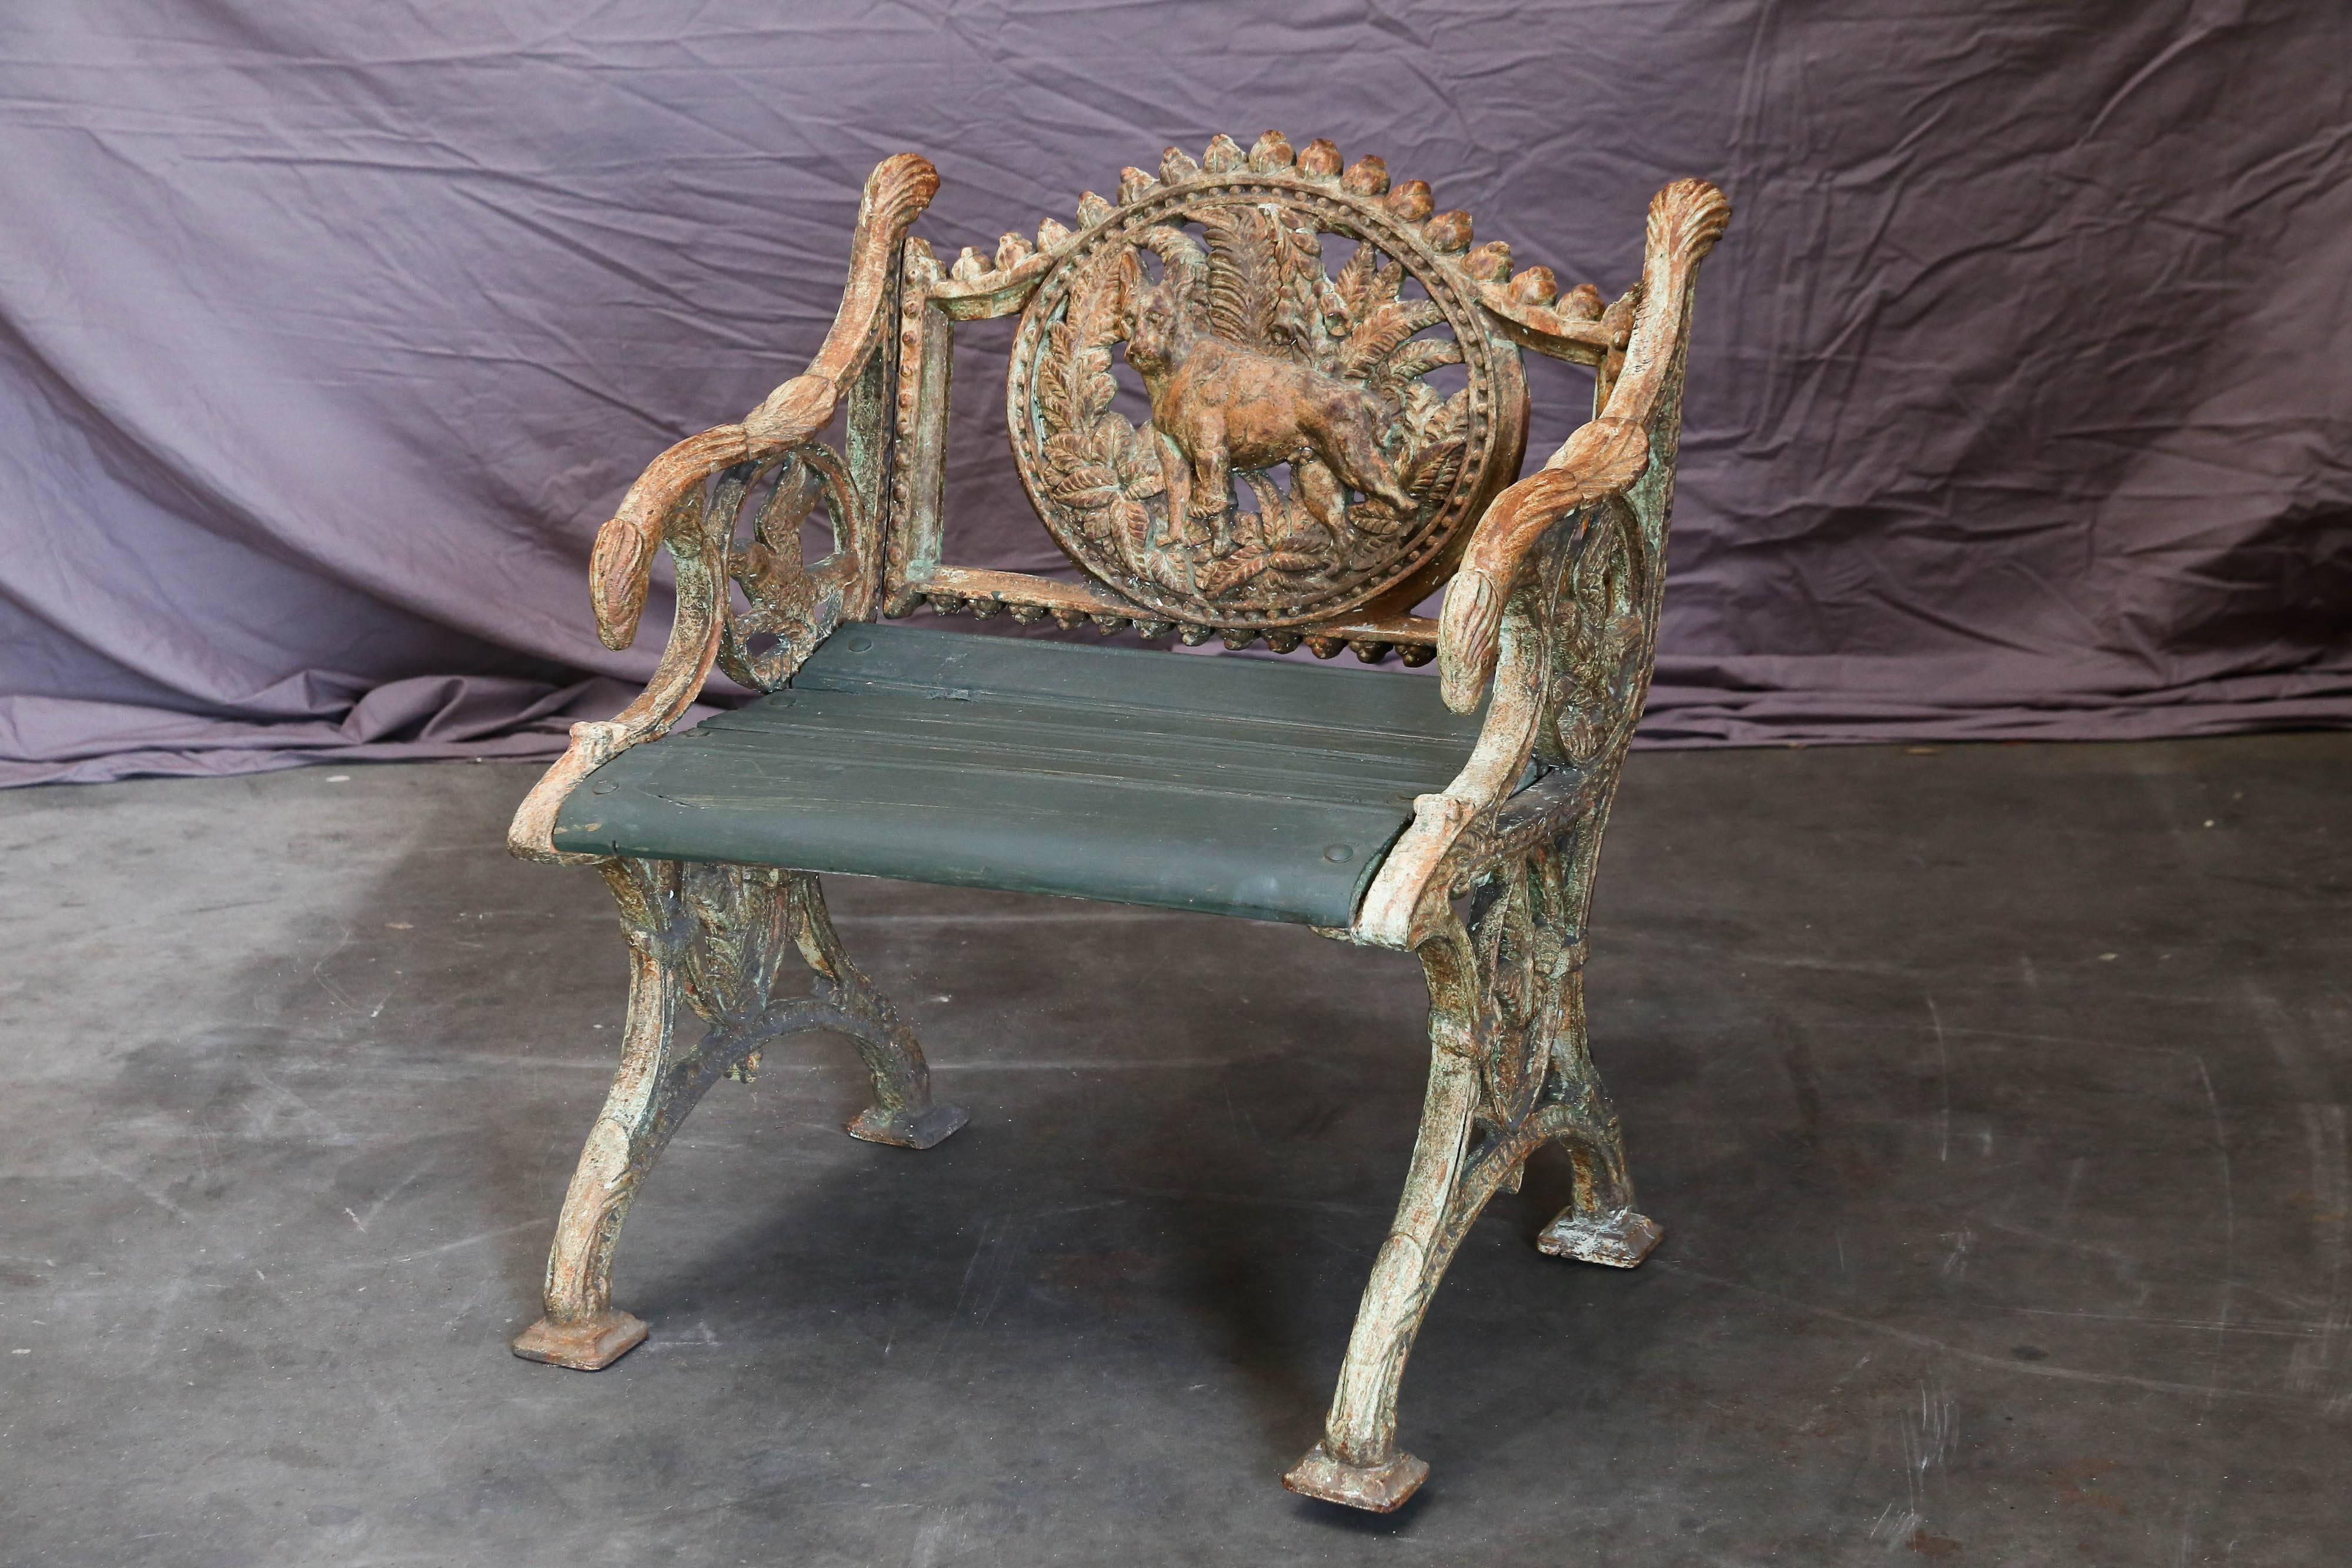 Chairs like these were cast in old foundries in Calcutta and were extensively used in colonial rail road stations. The wooden seats would be replaced when the seats were worn out. This one has a dog emblem. These benches can be used in outdoor